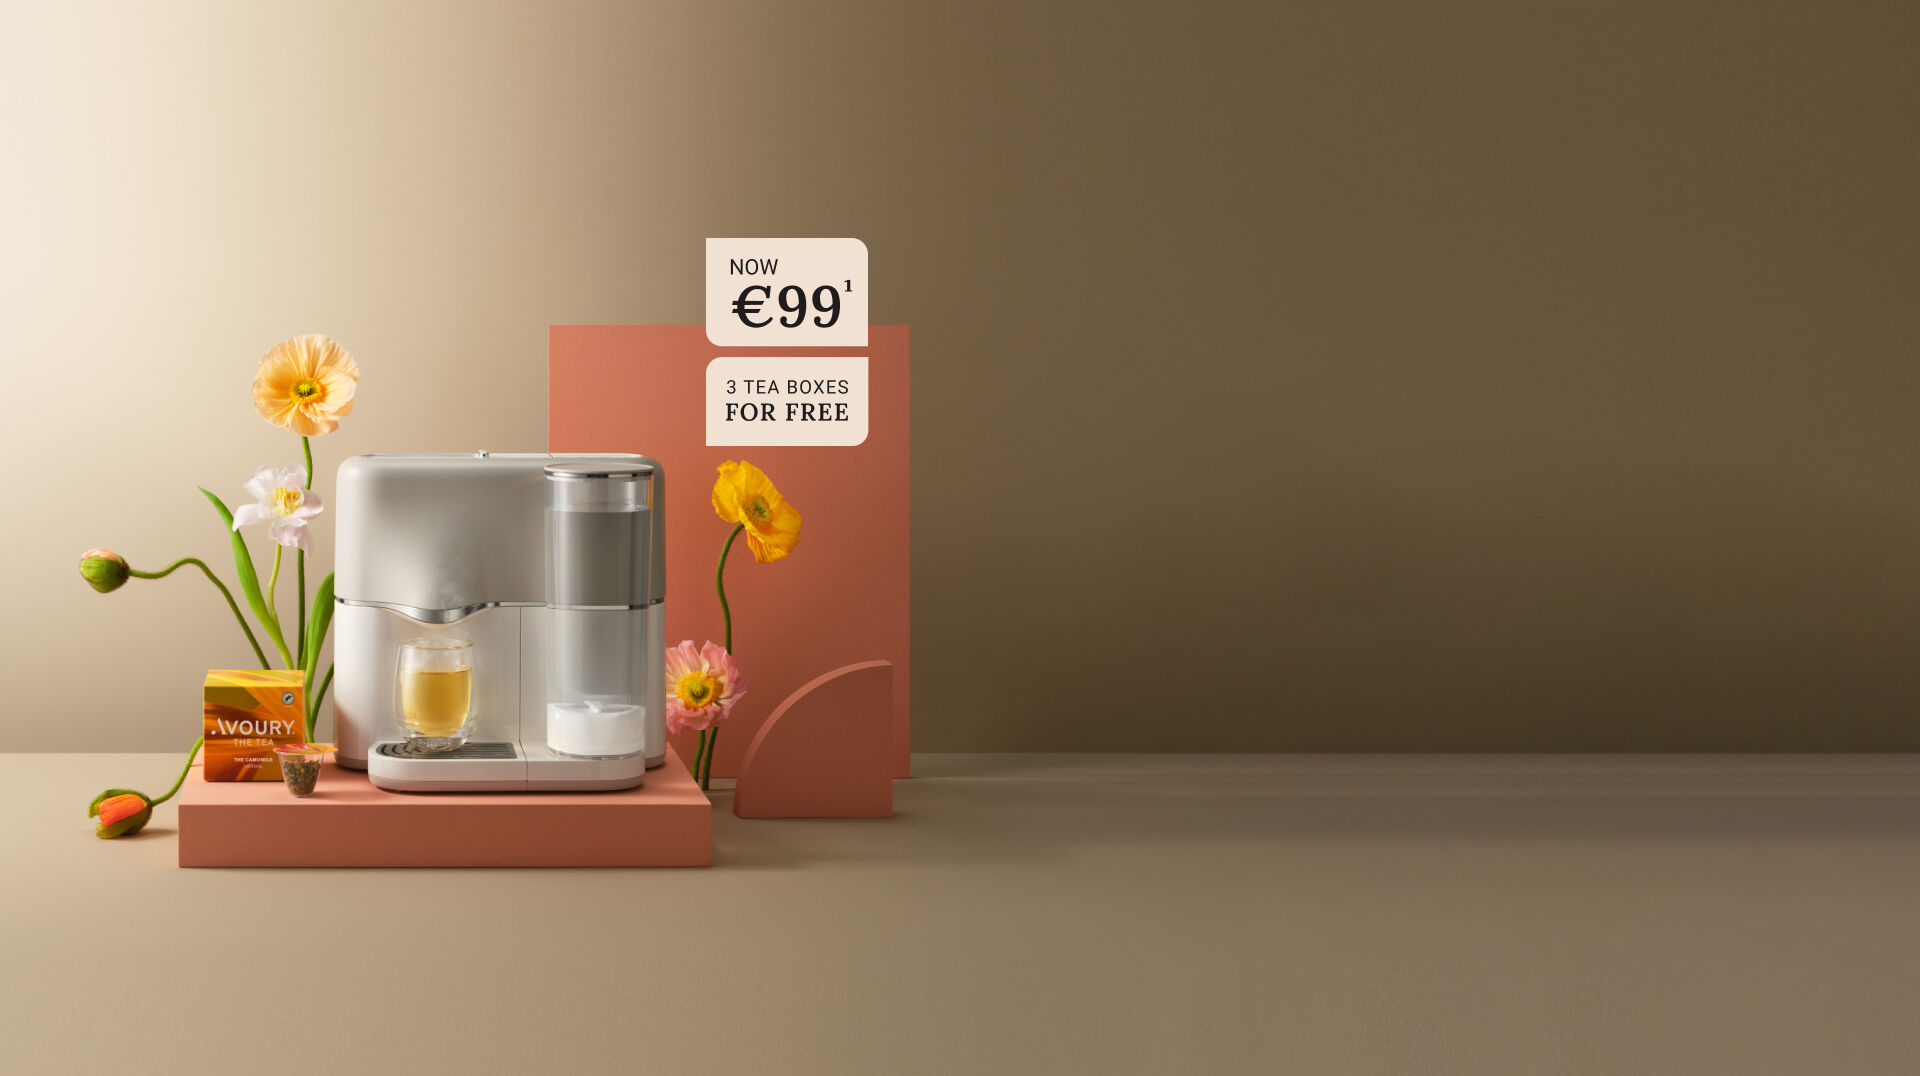 Avoury One tea machine in silver white with a cup of organic tea